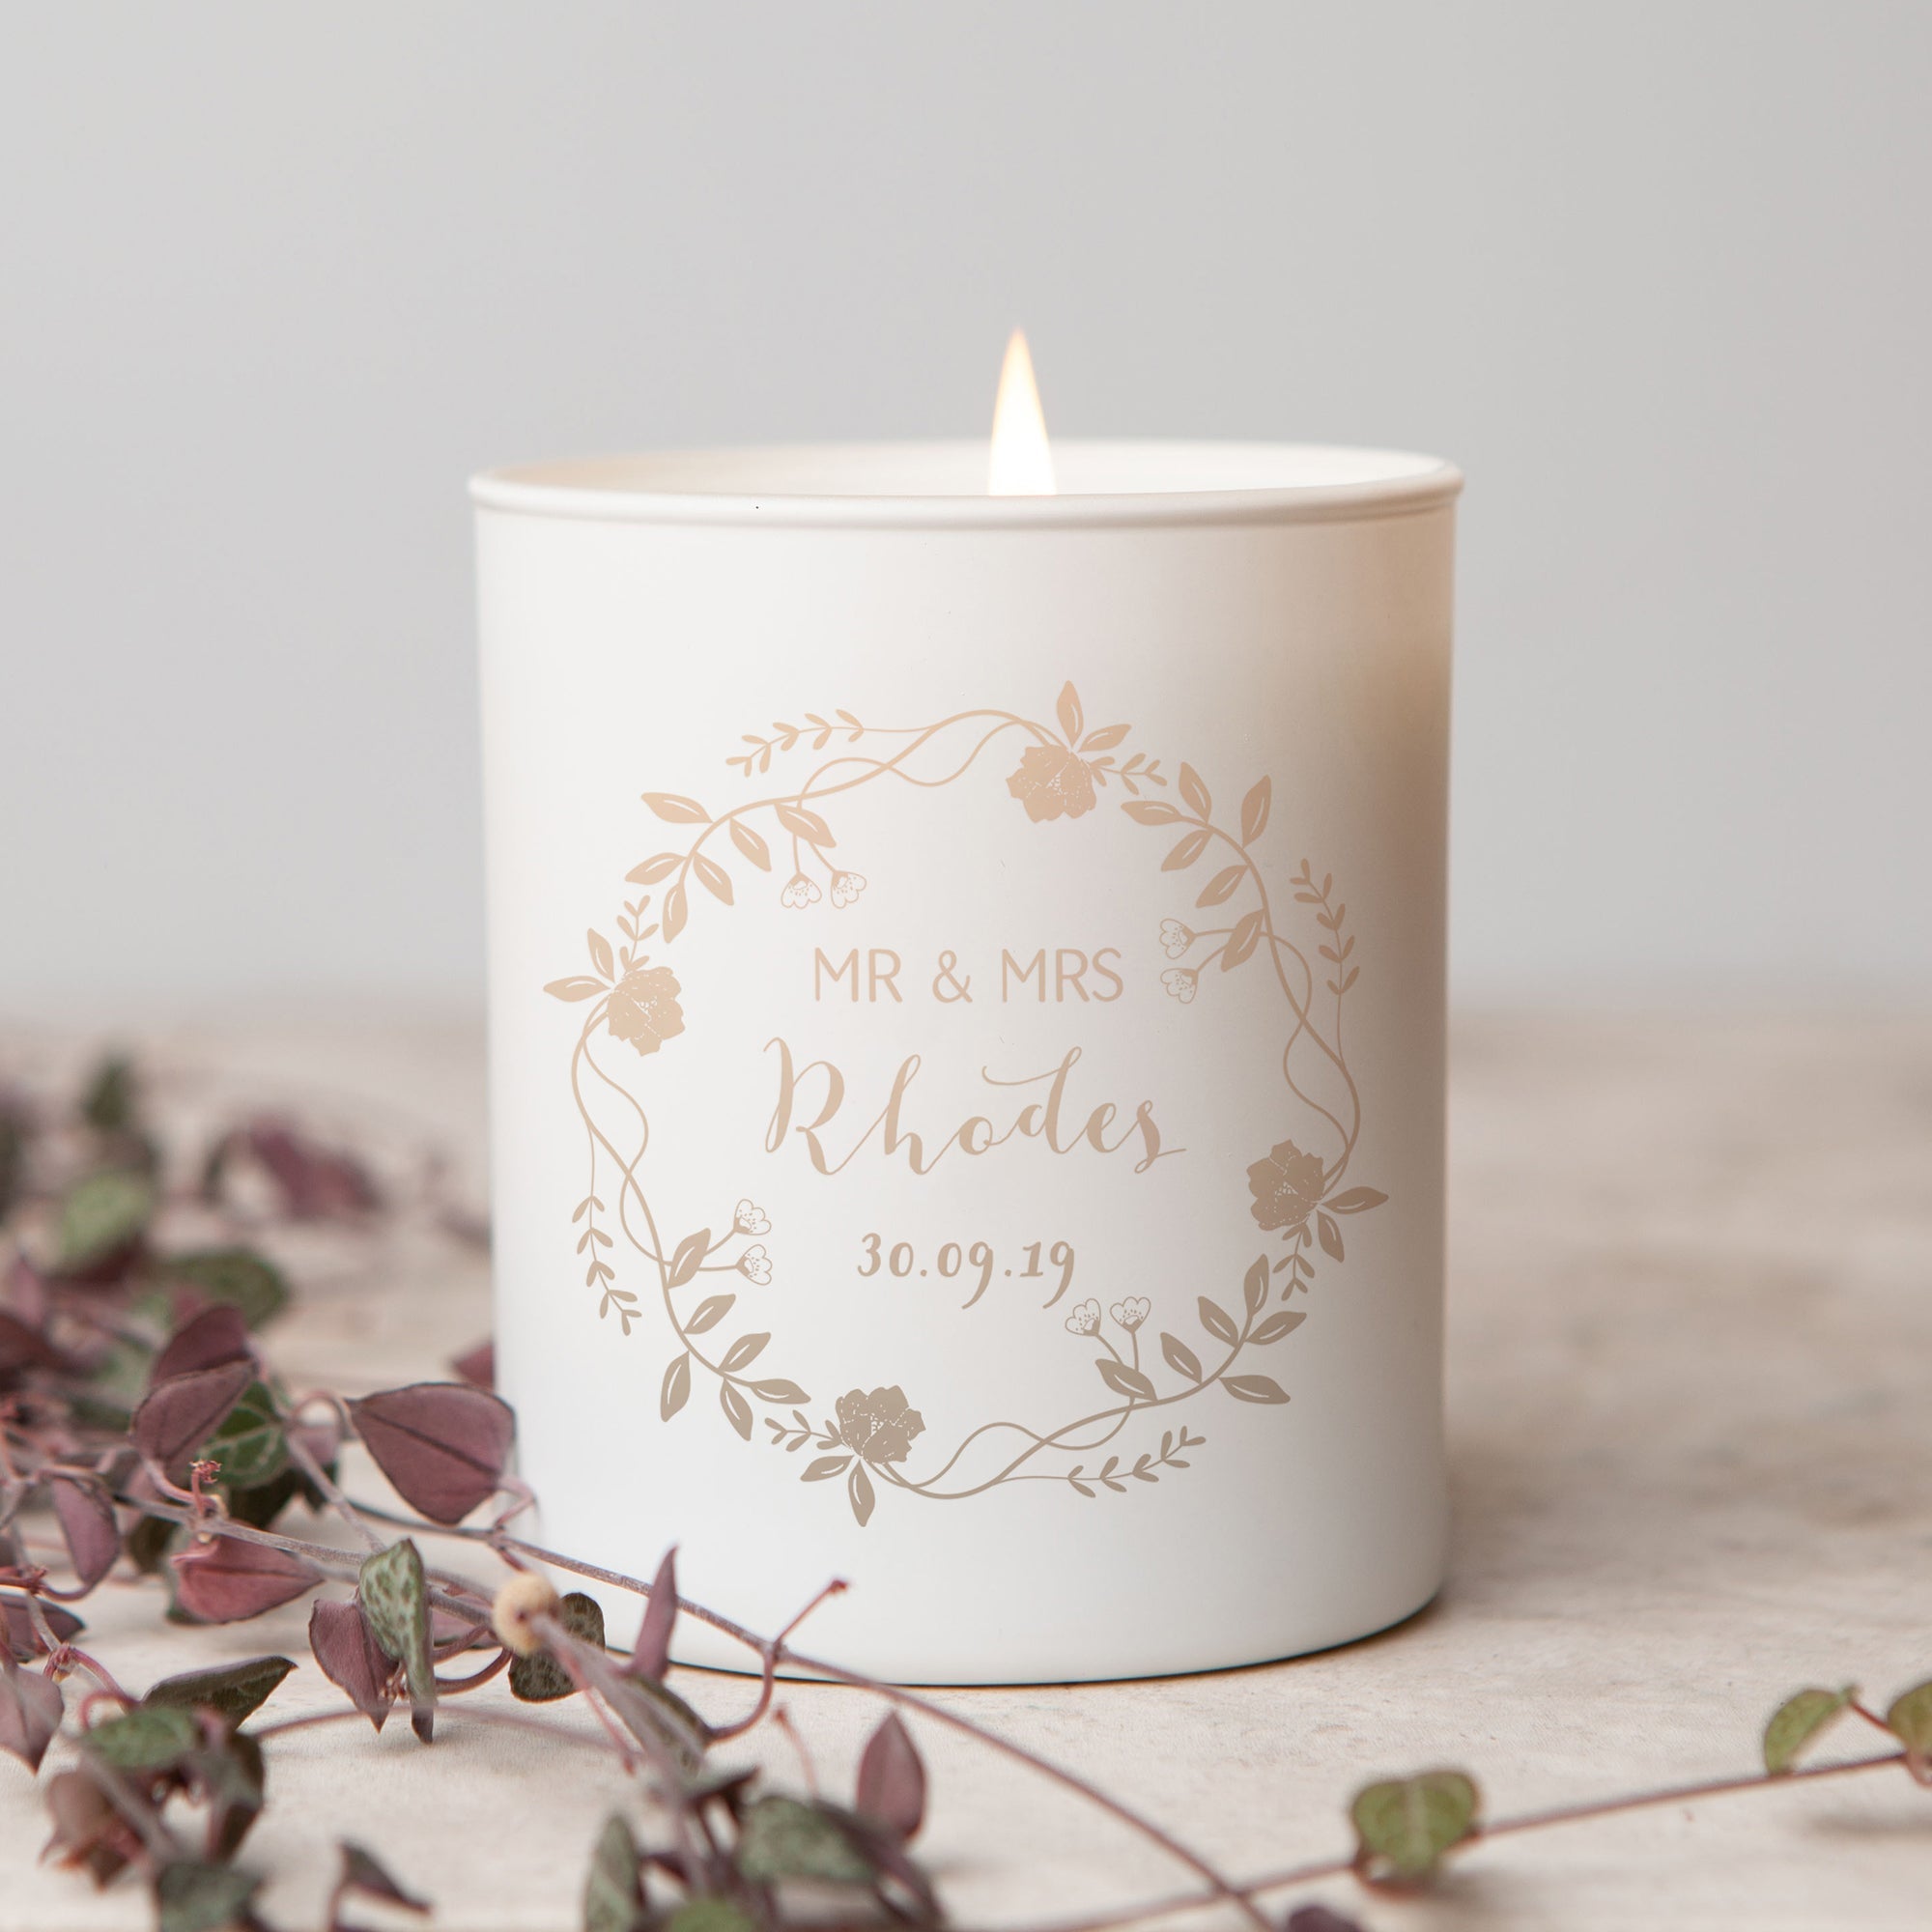 Custom candles pack for event guests gifts - Candlefuly